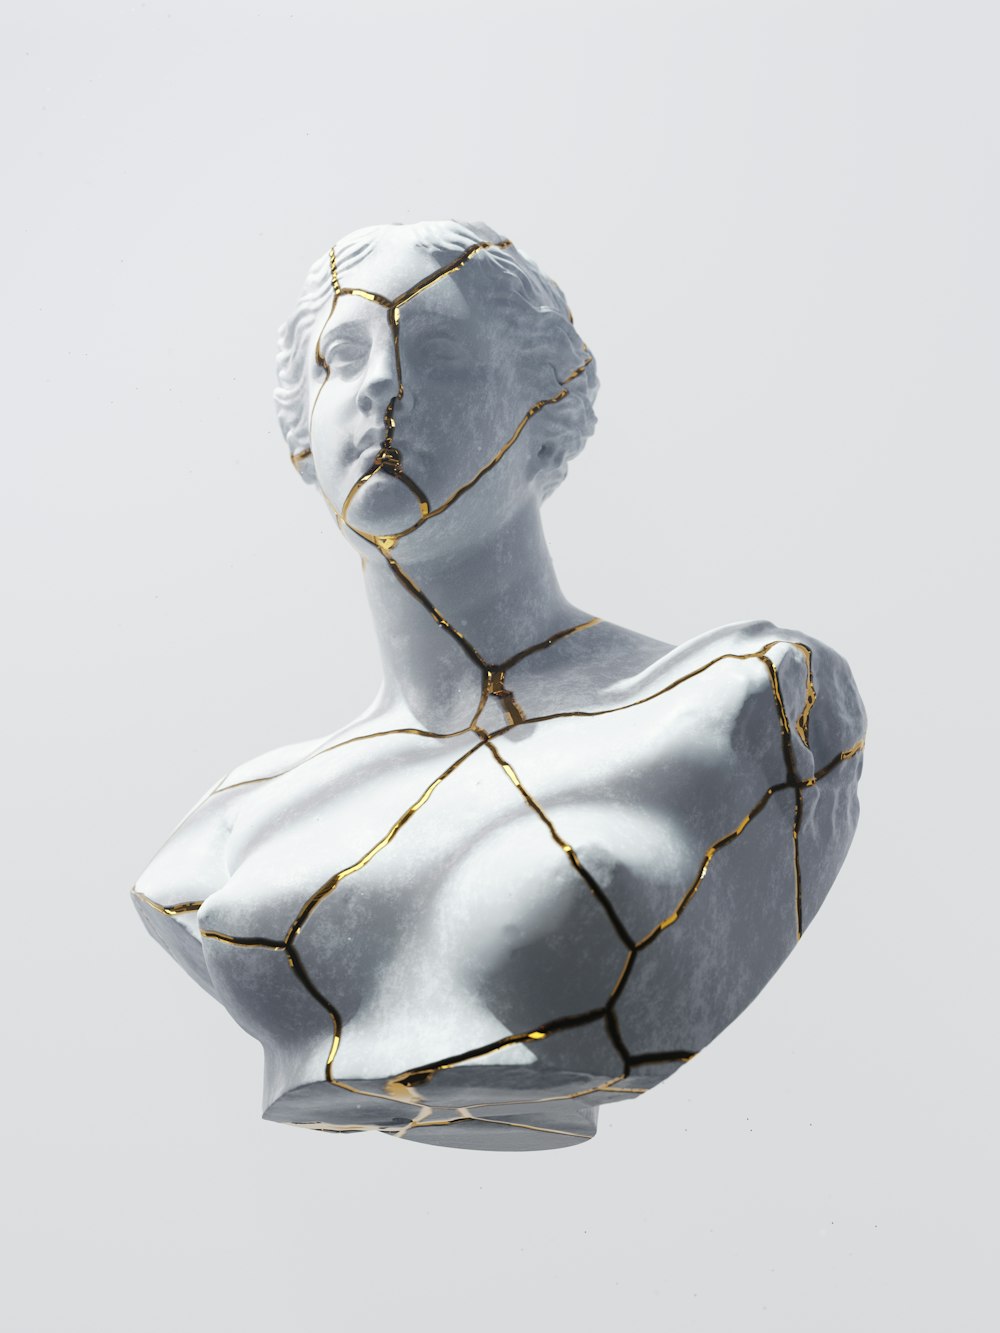 a sculpture of a person with a wire wrapped around it